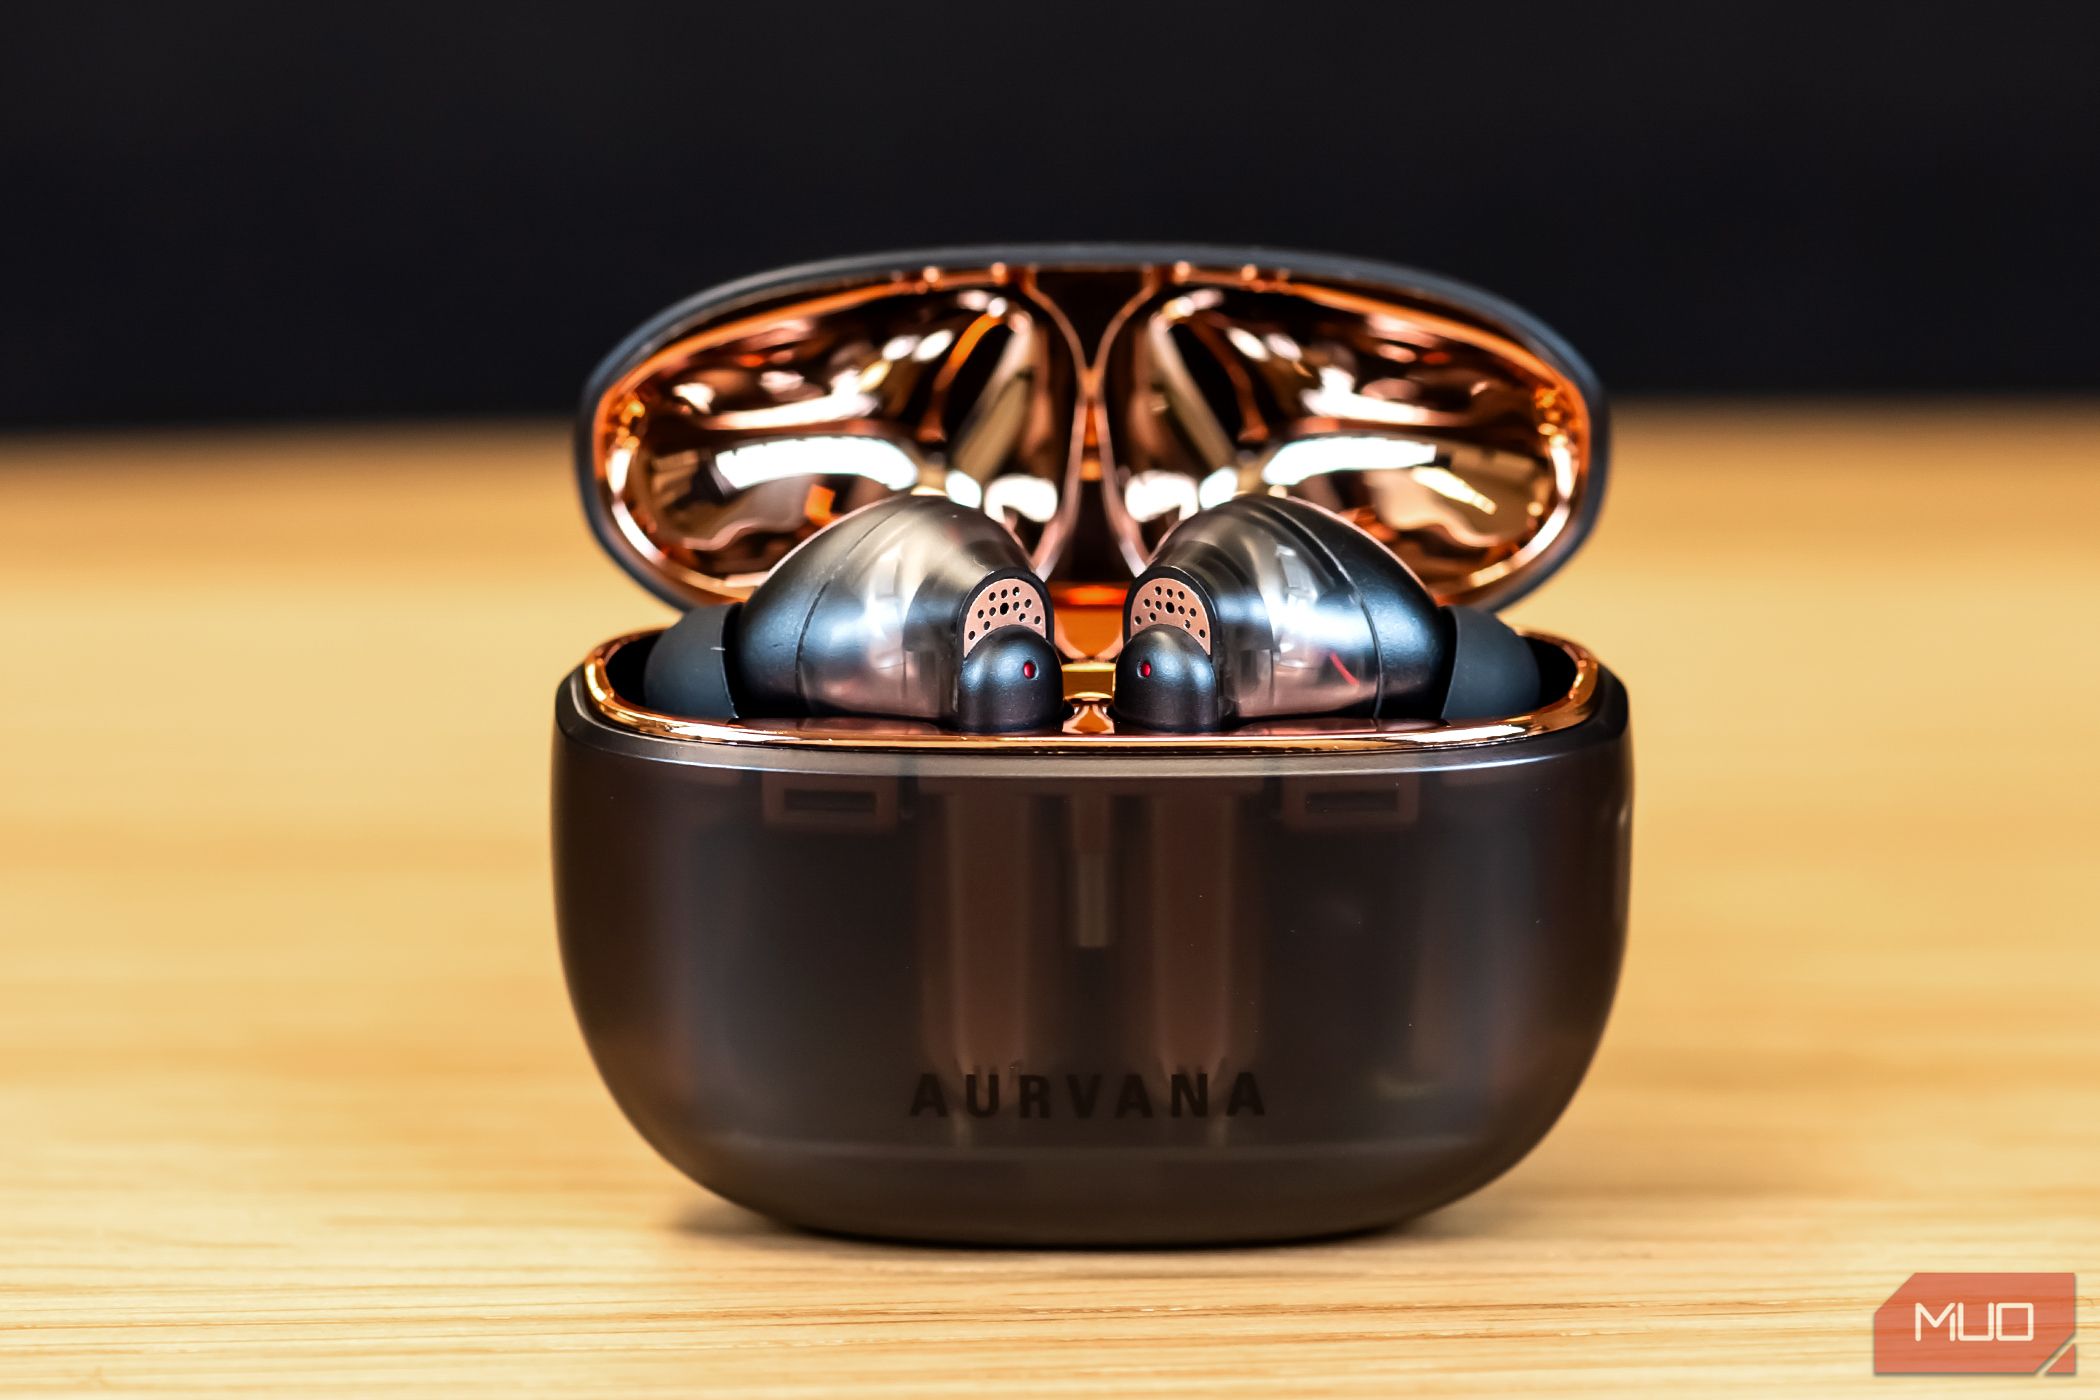 The Creative Aurvana Ace 2 earbuds in their case